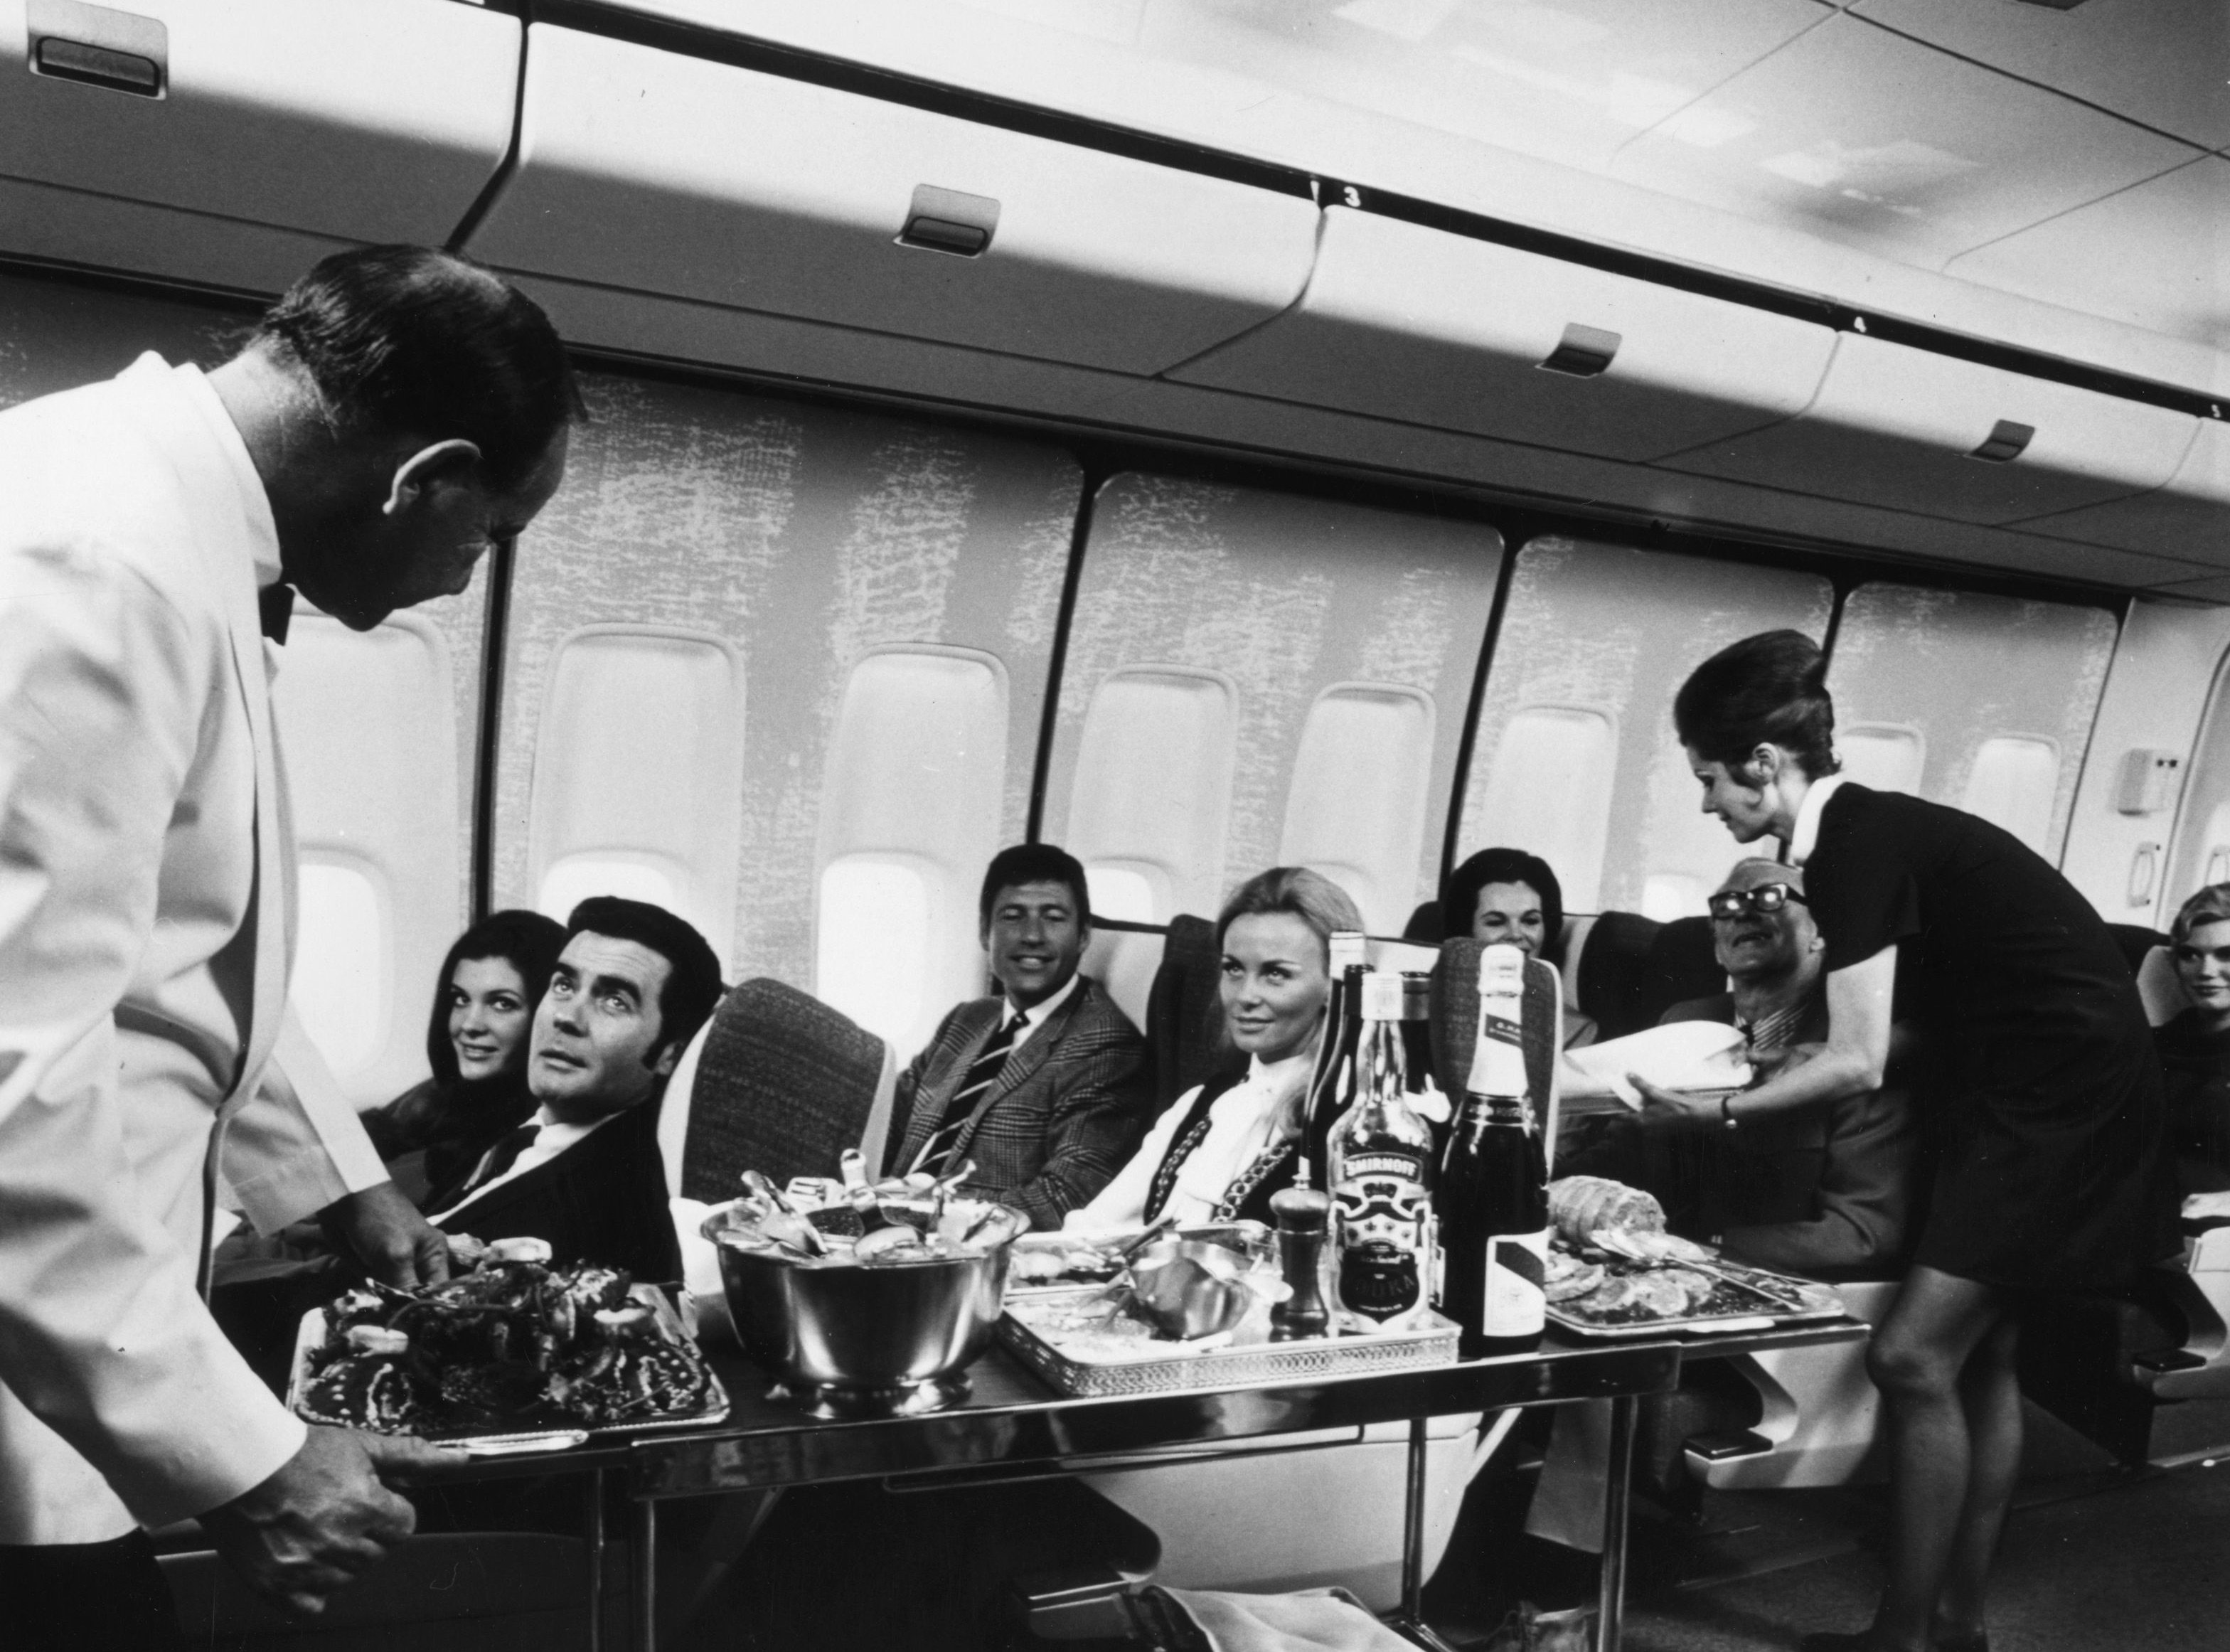 Flying Stupid: 5 Ways to Get Kicked Out of First Class